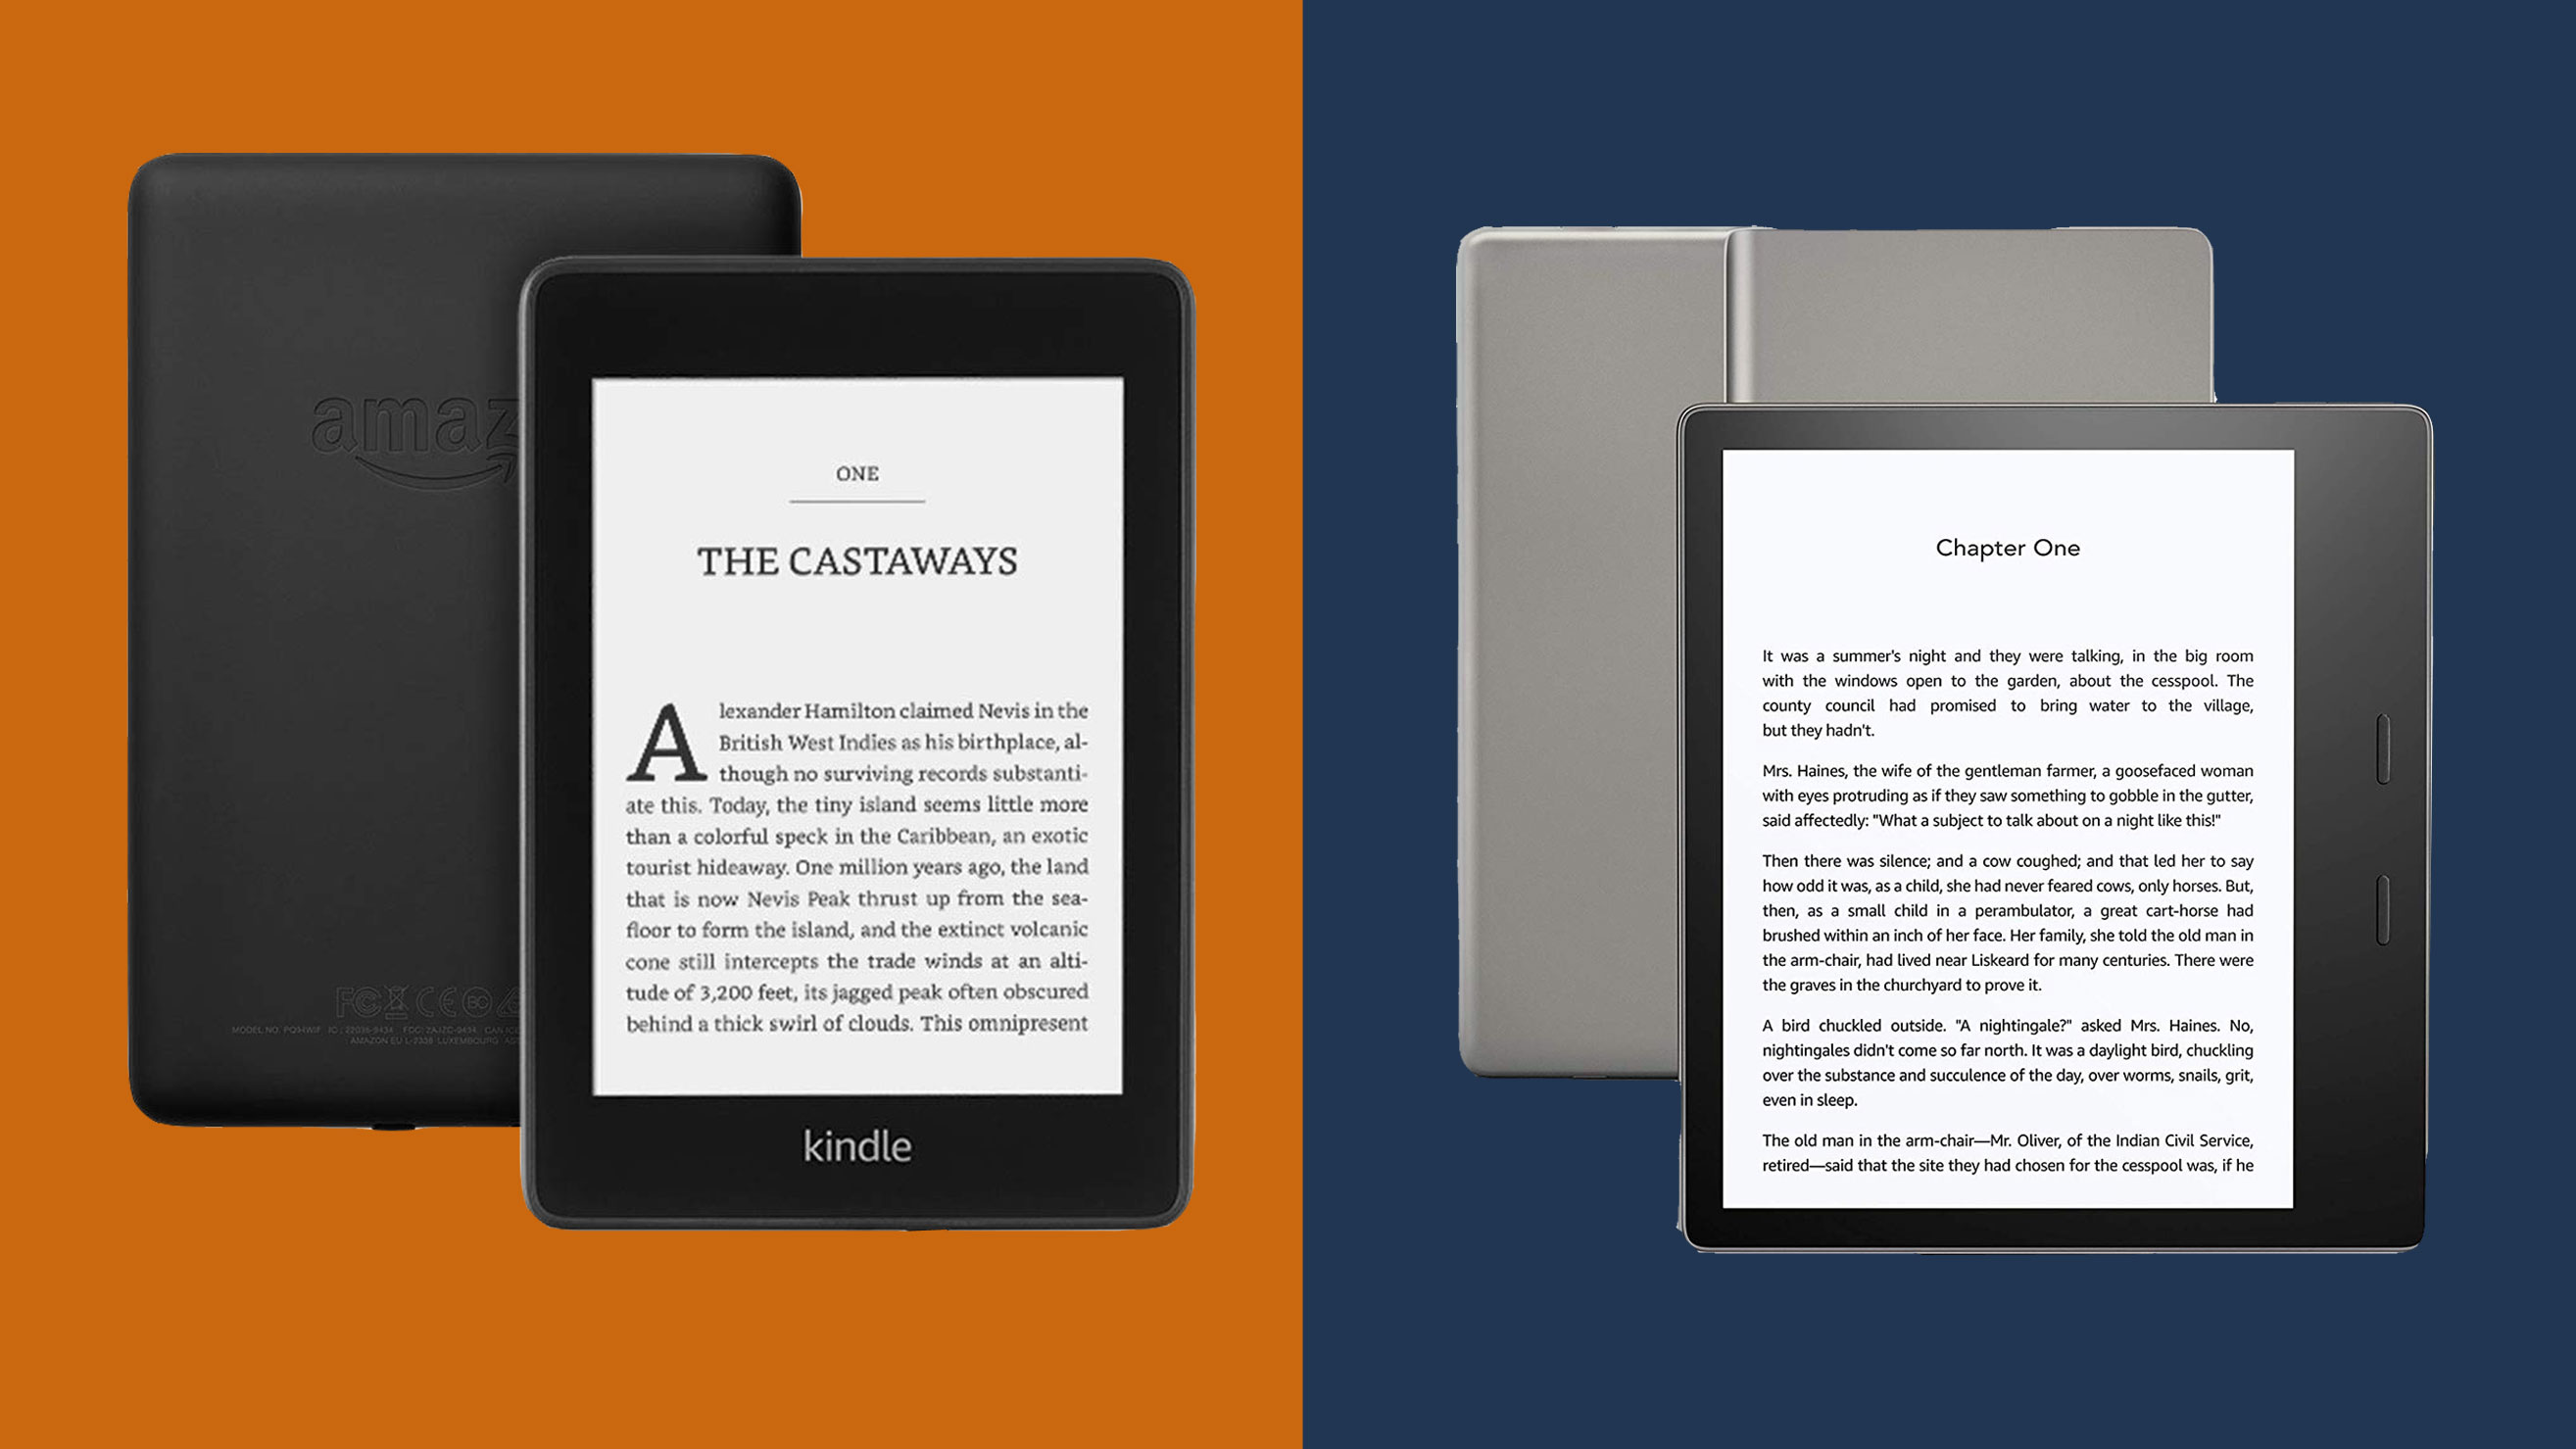 Kindle Paperwhite vs Kindle Oasis: Which one should you buy? - Reviewed